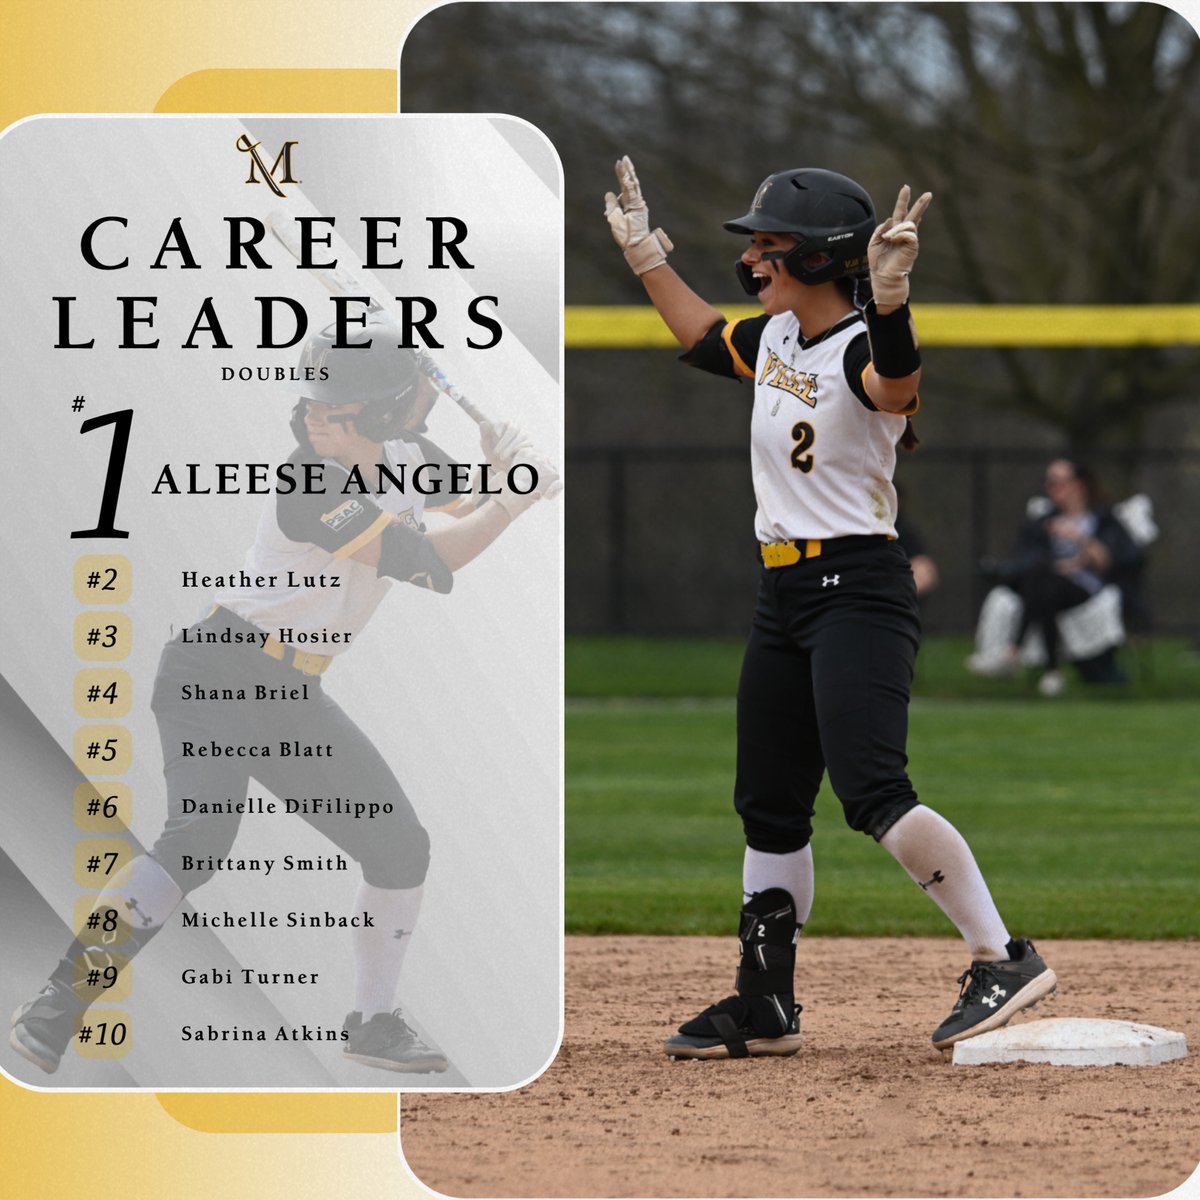 Aleese Angelo is alone at the top of the Marauder record books once more after tallying her fifty-fourth career double this afternoon: